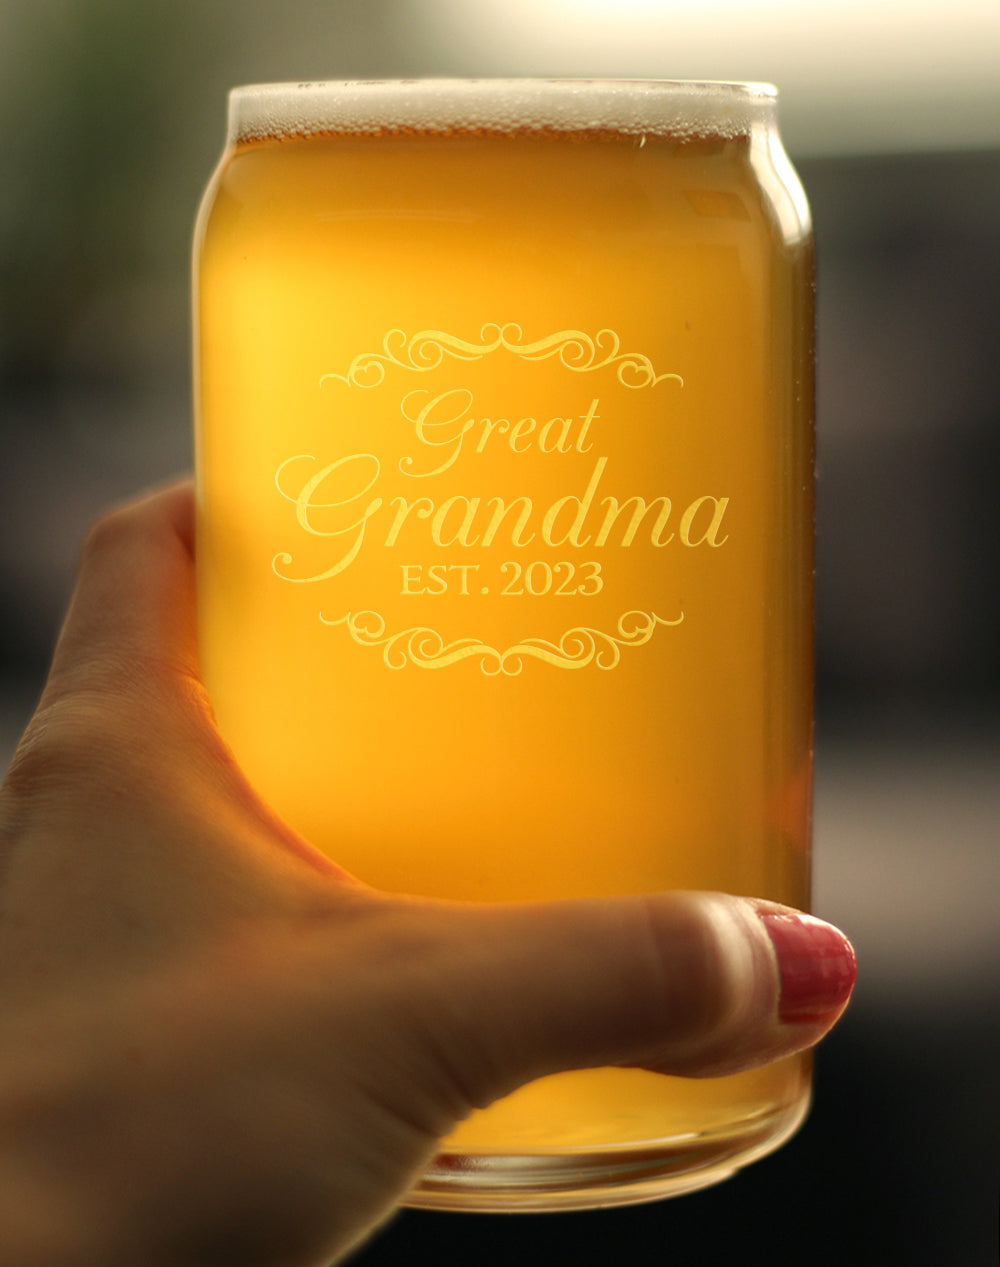 Great Grandma Est 2023 - New Great Grandmother Beer Can Pint Glass Gift for First Time Great Grandparents - Decorative 16 Oz Glasses